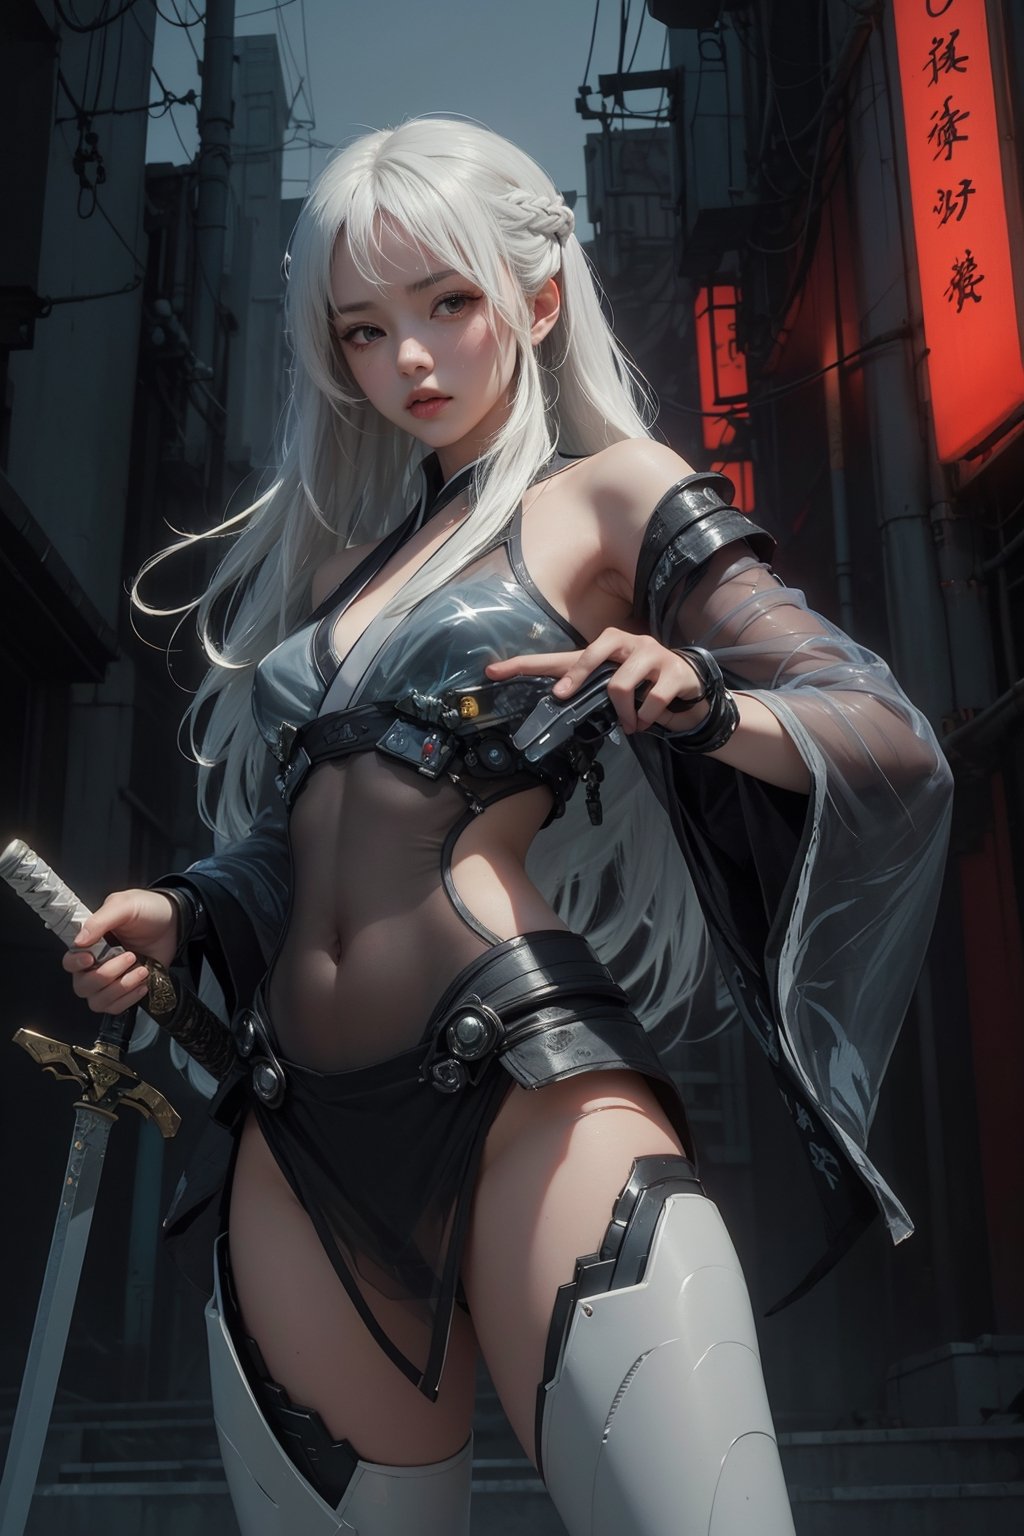 ((dynamic pose)), masterpiece, 1 kunoichi, muted color+soothing tones, ((white long hair)), (black transparent plastic warrior kimono+body implants,holding a sword) ,(at night),Cyberpunk,A Traditional Japanese Art,Enhance